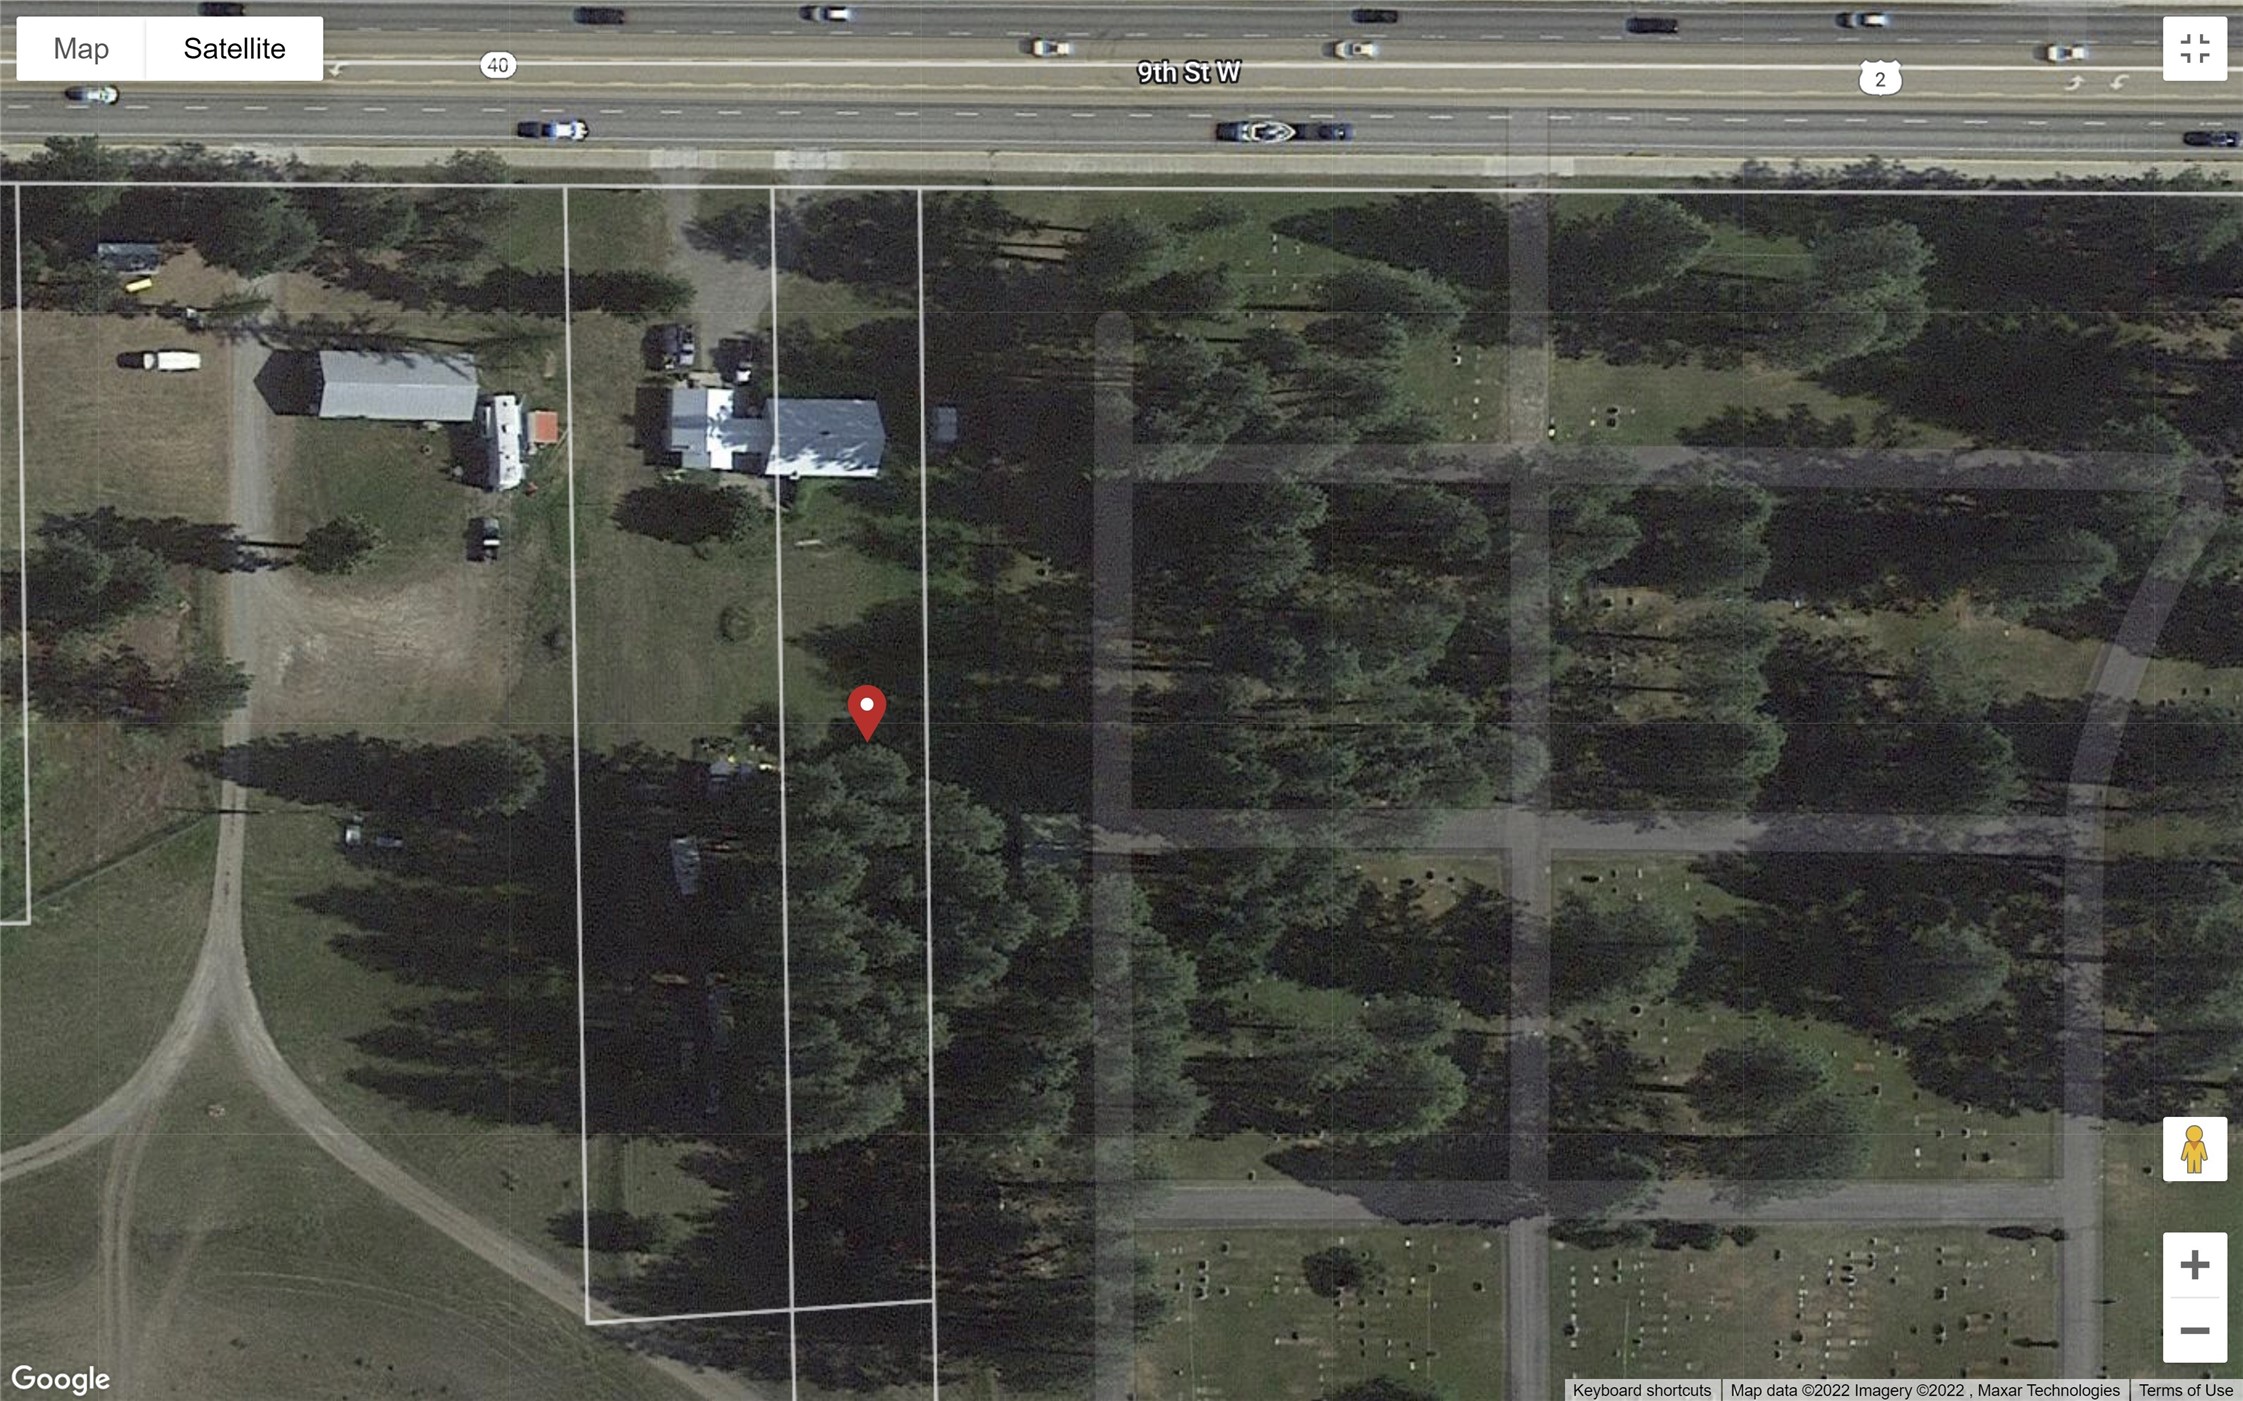 Attention Business Owners and Investors! Prime Commercial Property with Endless Potential now available! This 1.55-acre property boasts a 22,300+ traffic count, excellent visibility from the highway, 155’ of Hwy 2 frontage, 2 curb cuts and a 1450sf house plus outbuildings that can be used for multiple purposes. This is a rare opportunity to own a piece of commercial real estate in a highly sought-after location. The land is developable and ready for your next business venture. Imagine your business being seen by thousands of commuters daily, giving you maximum exposure and a constant stream of potential customers. The location offers easy access to major highways, making it convenient for both employees and customers. Don't miss out on this unique opportunity to own a piece of commercial real estate with unlimited potential. Call Sean Scally 406-360-1652 or your real estate professional.